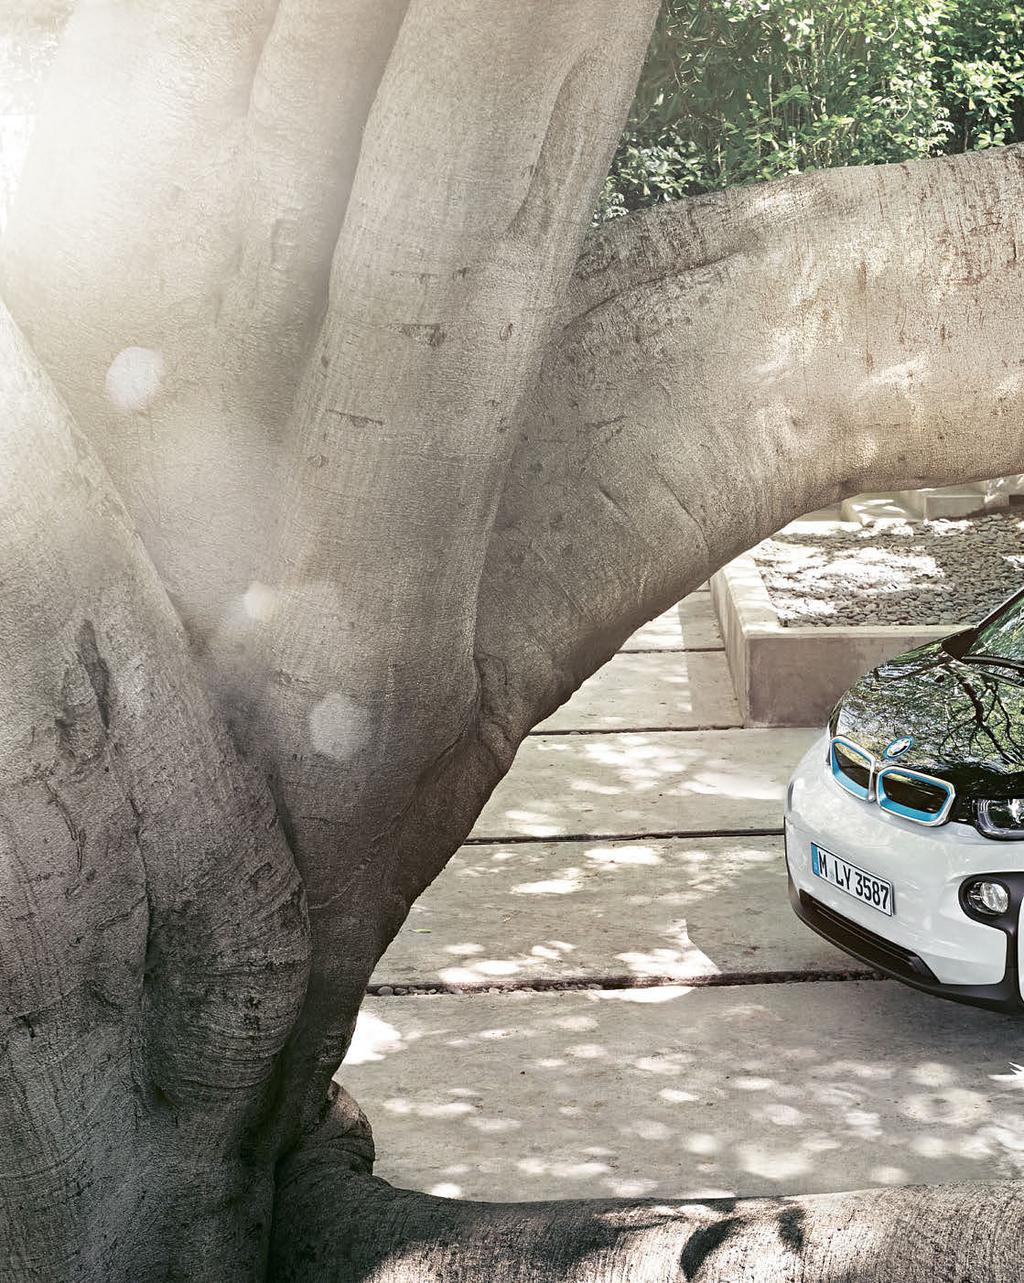 THE MOST SUSTAINABLE POWER IS THE POWER OF IDEAS. THE BMW i3 10 11 Sustainability is everything to us.